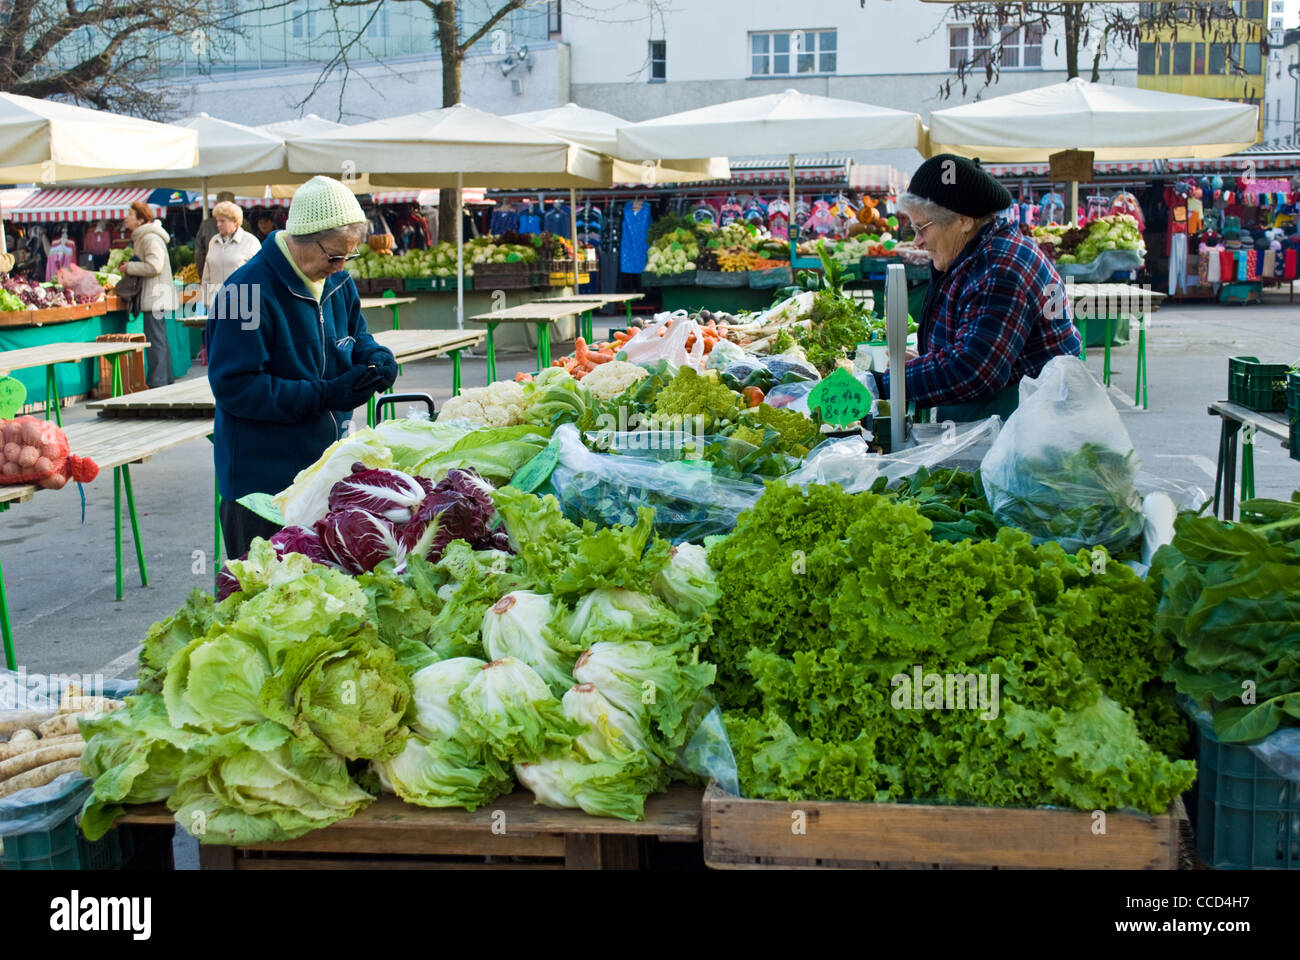 A woman buying vegetables from market stall in Ljubljana, Slovenia. Stock Photo